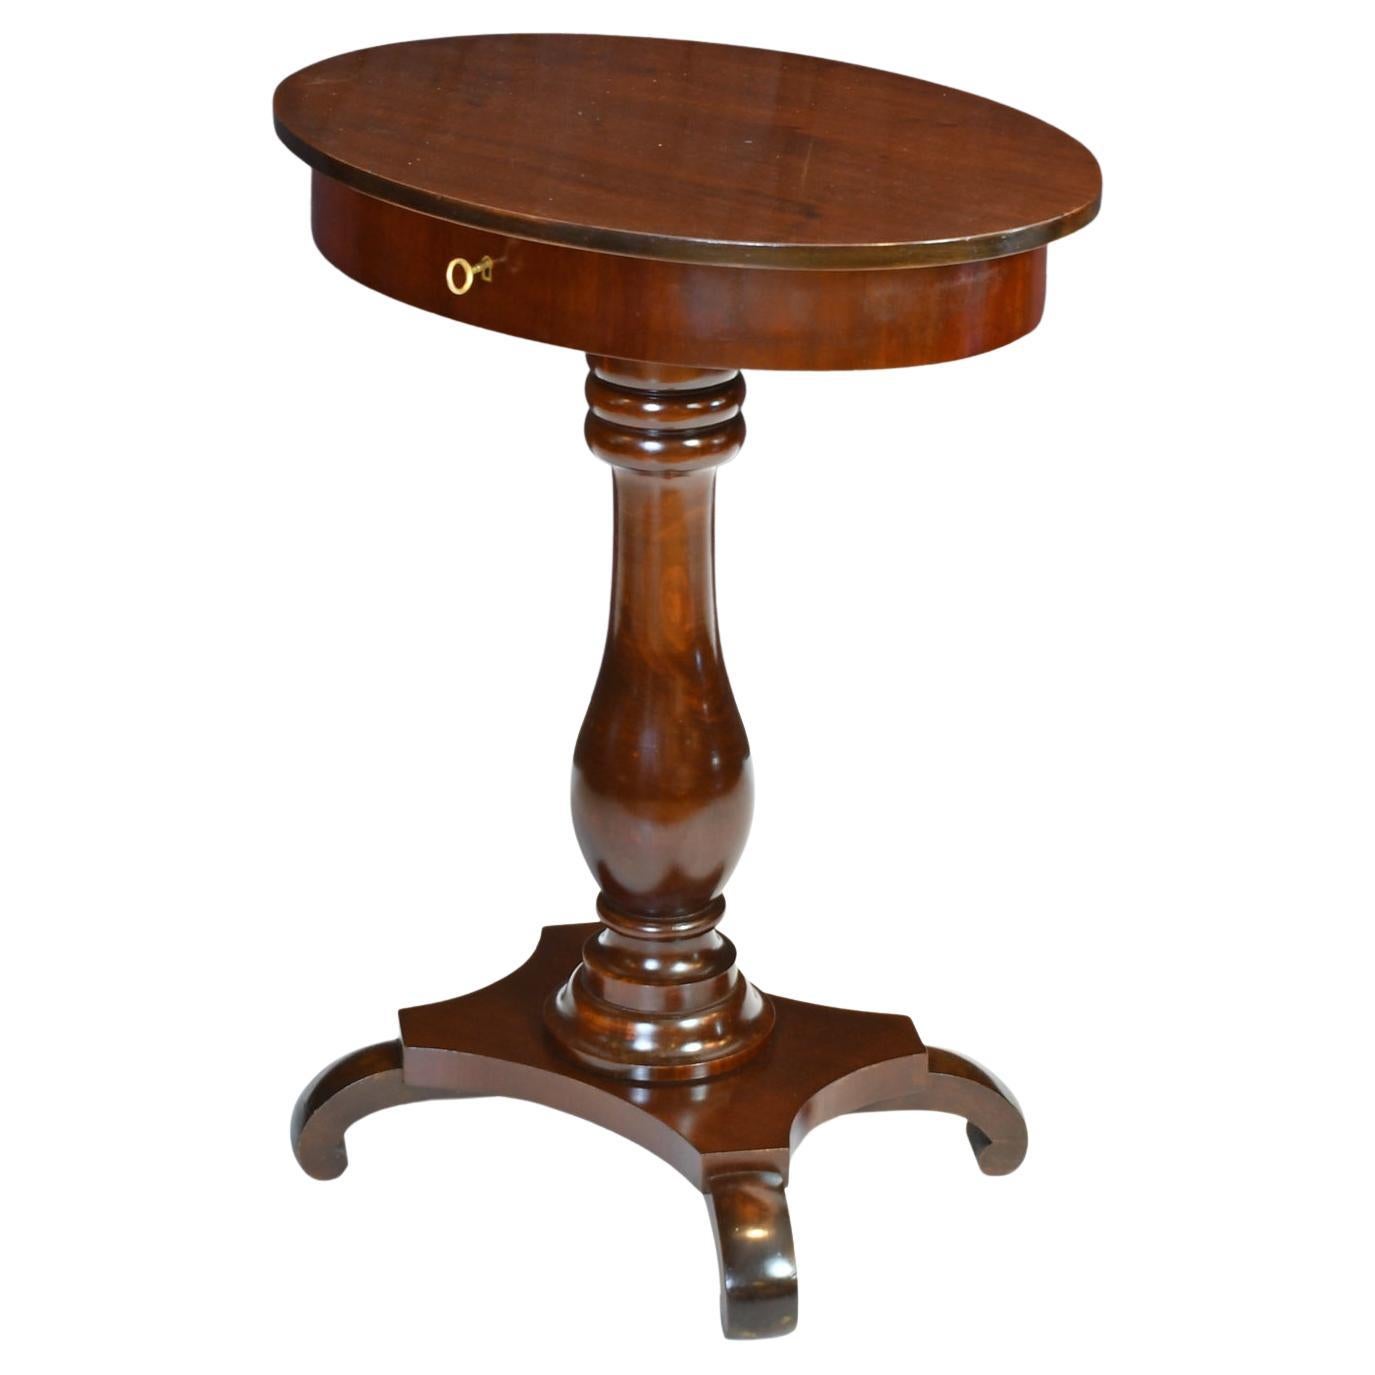 Small Antique Oval Pedestal Table or Work Table in Dark-Stained Mahogany For Sale 3